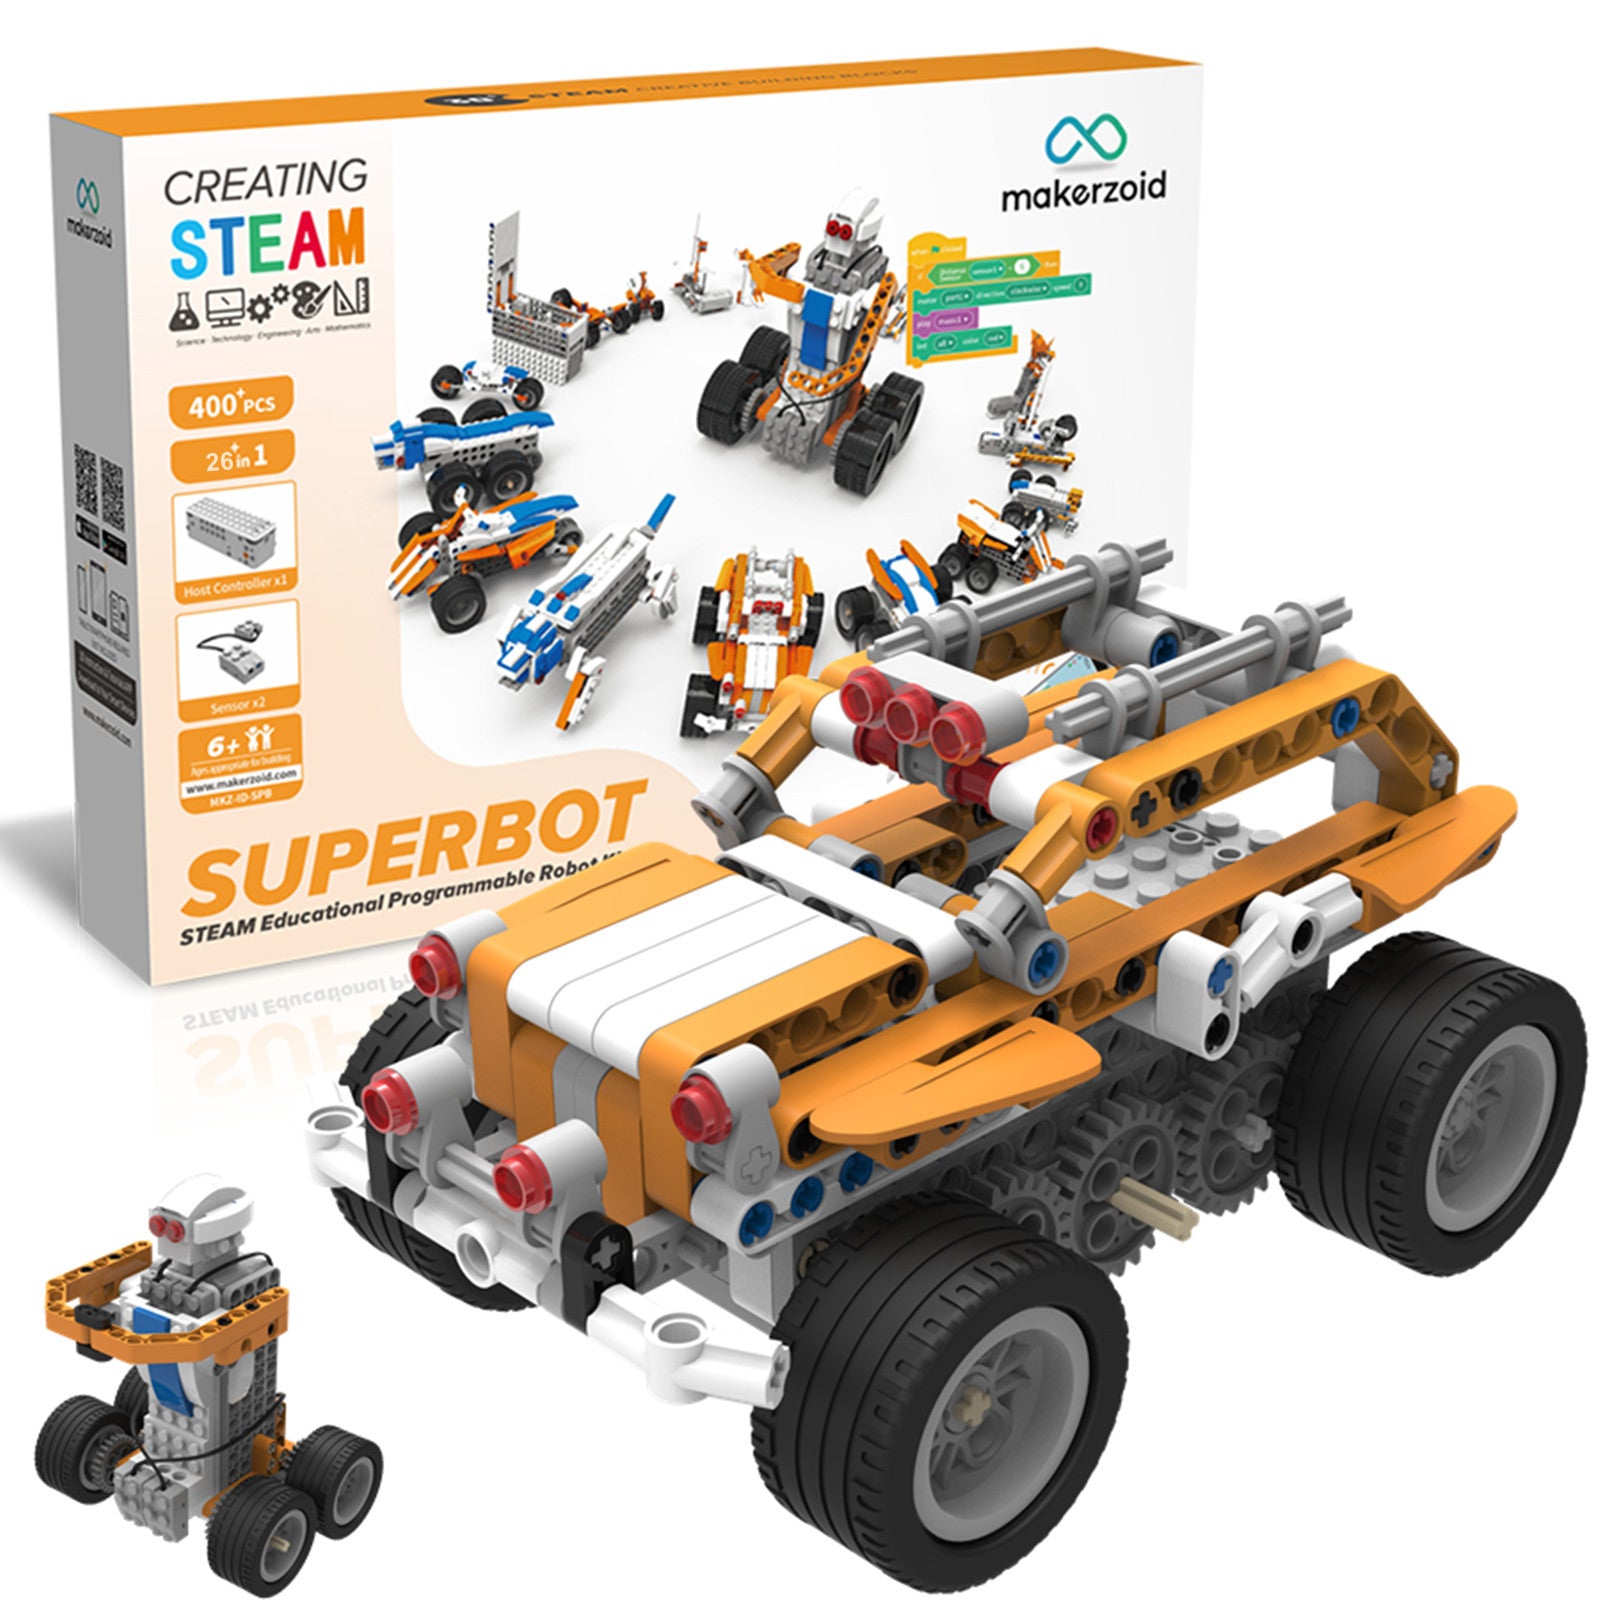 Building and Coding STEM Robot @